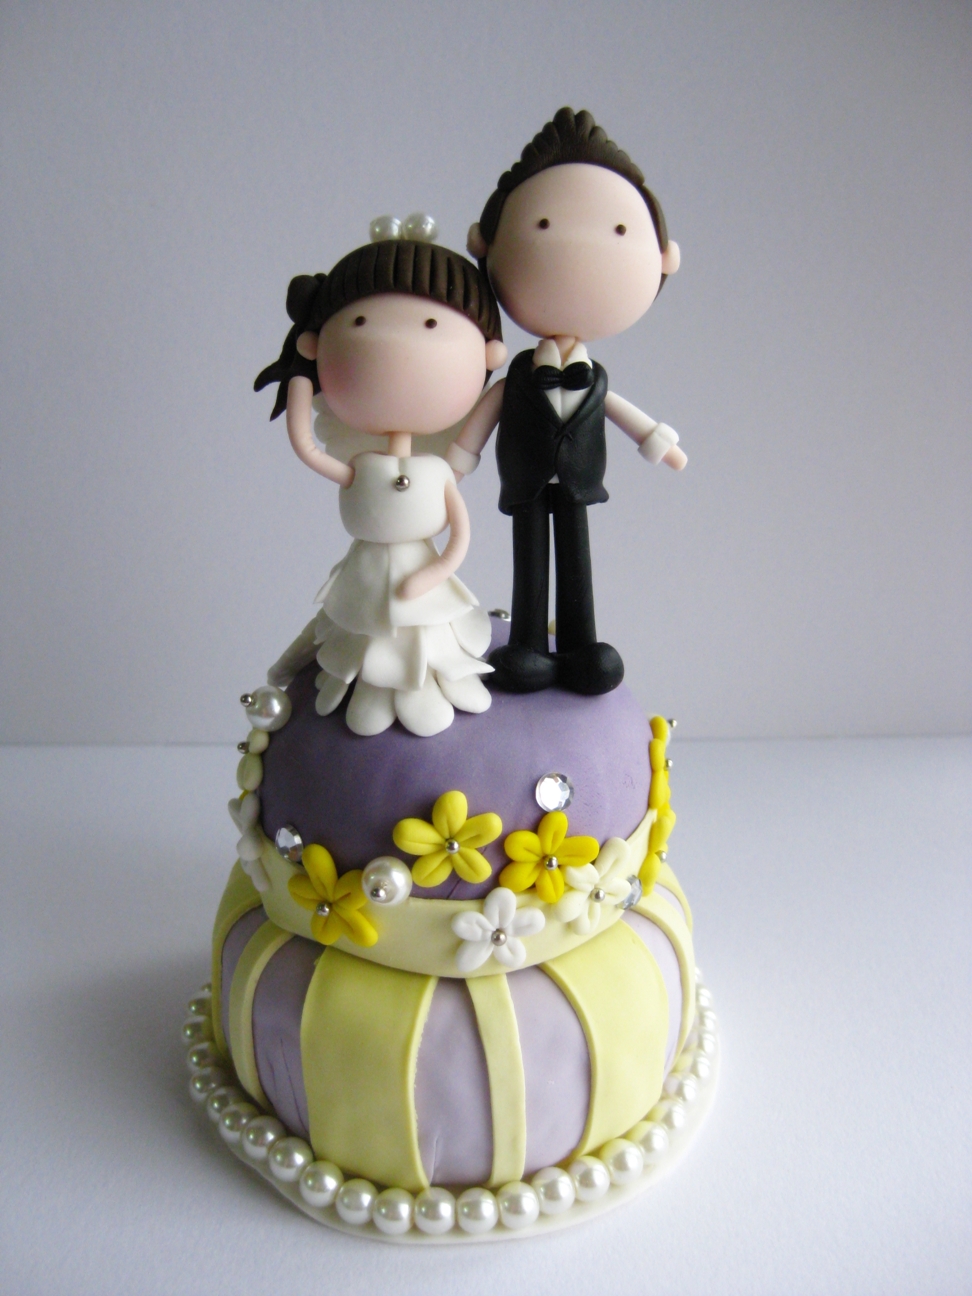 Wedding Clay Cake Topper - Standing On Top Of A Cake (not Edible)